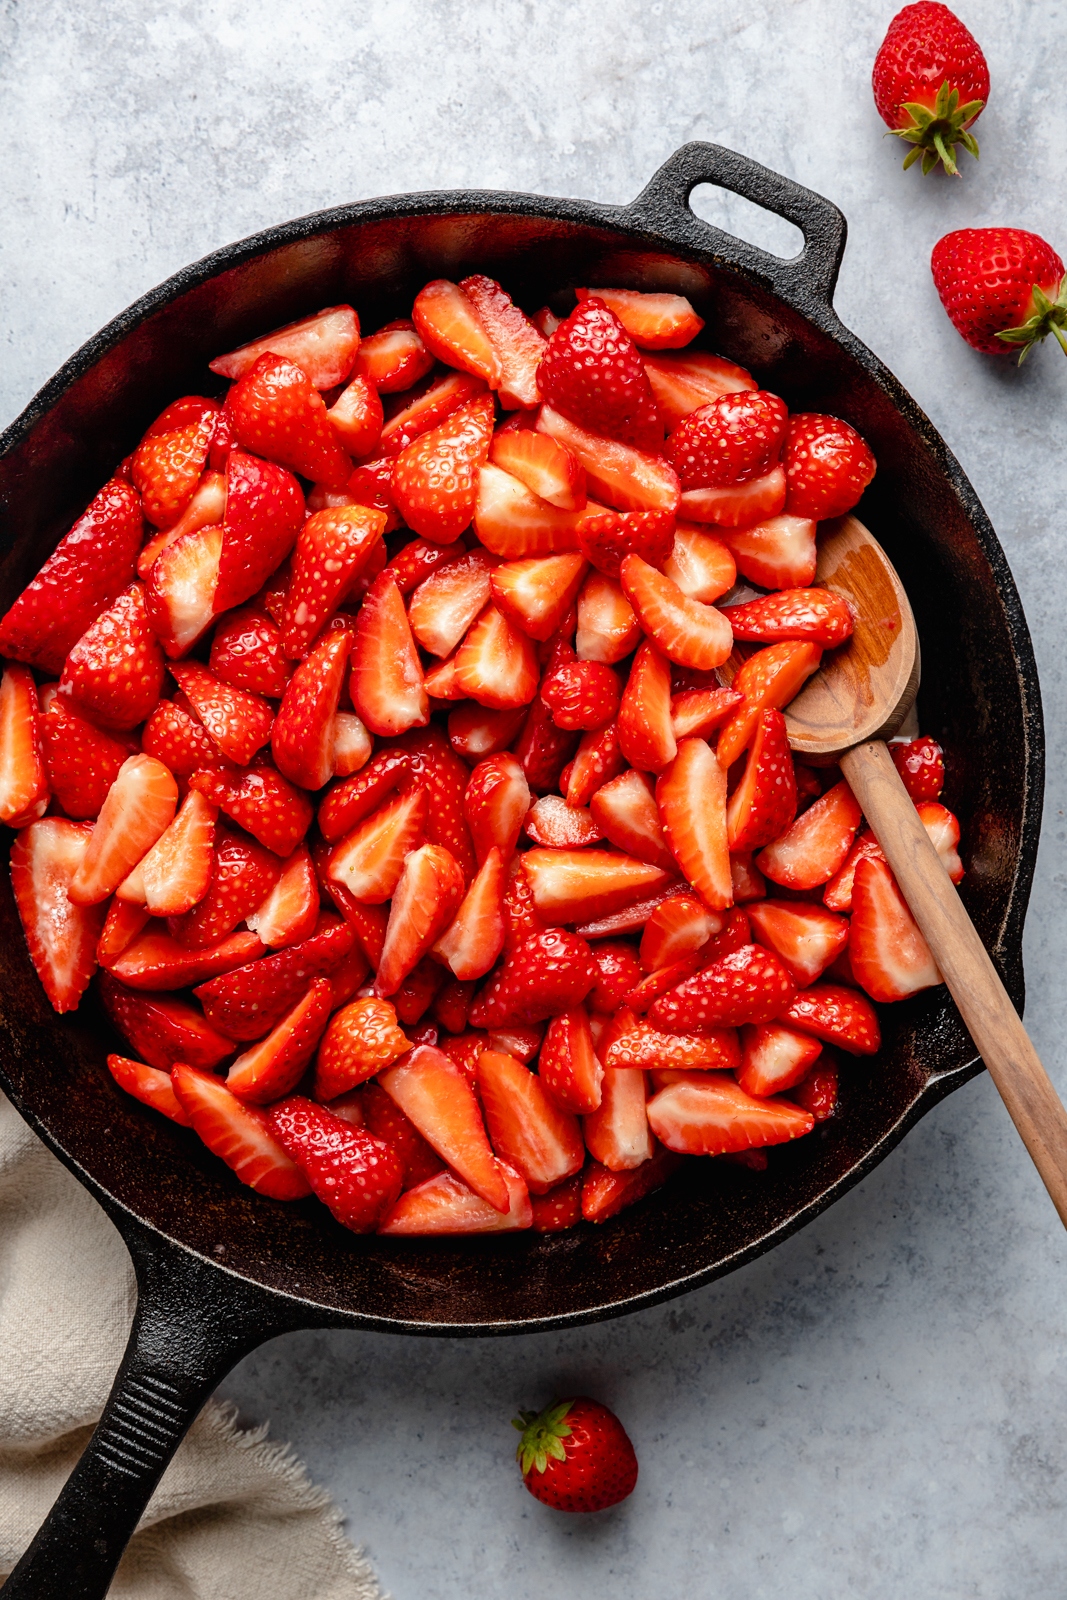 strawberries in a skillet to make a healthy strawberry crisp recipe